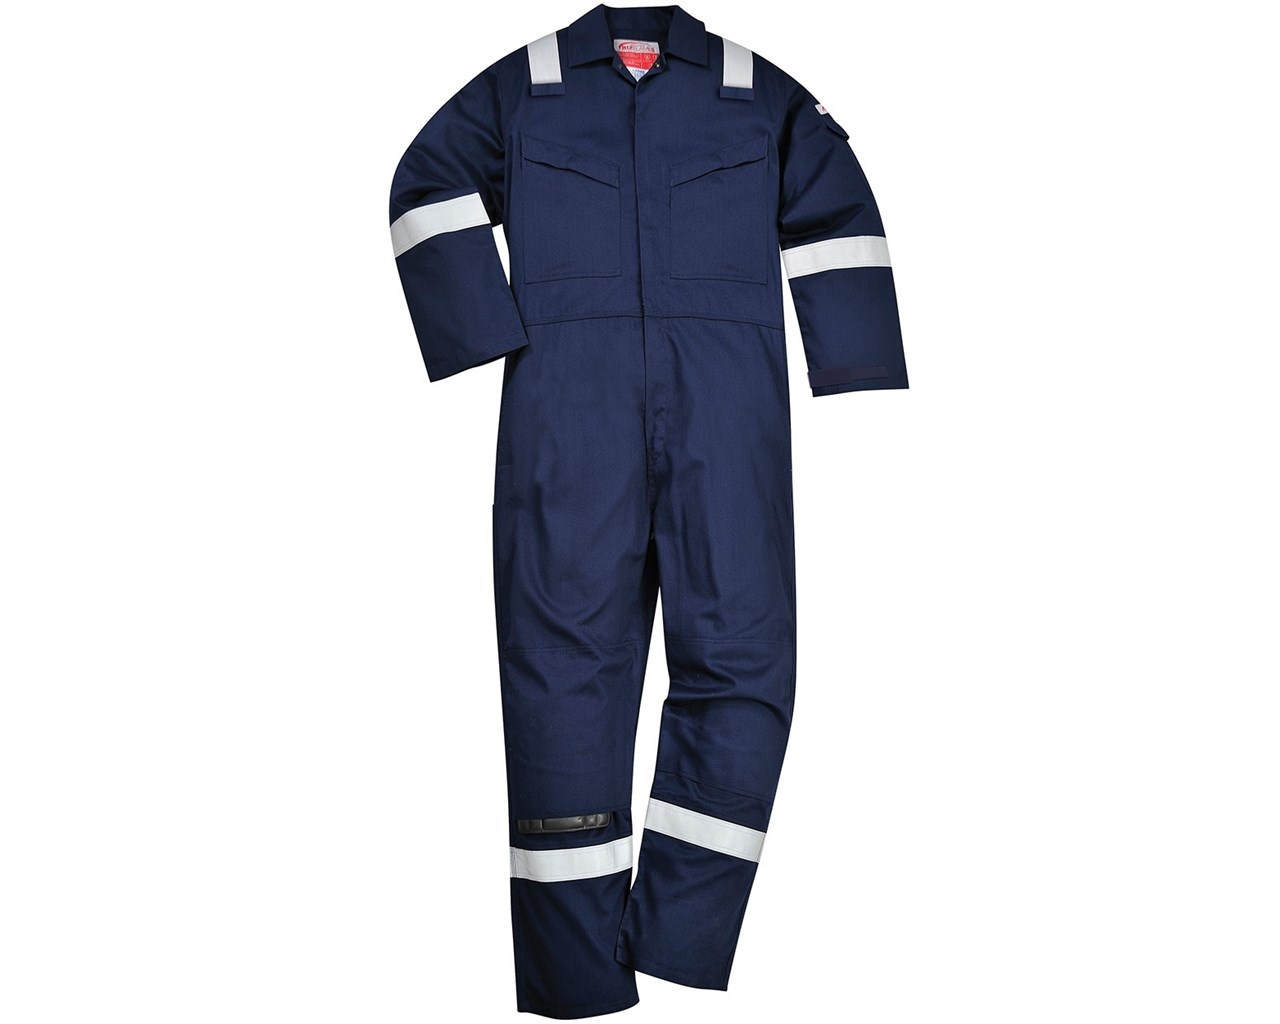 Portwest Flame Resistant Super Light Weight Anti-Static Coverall 210g FR21